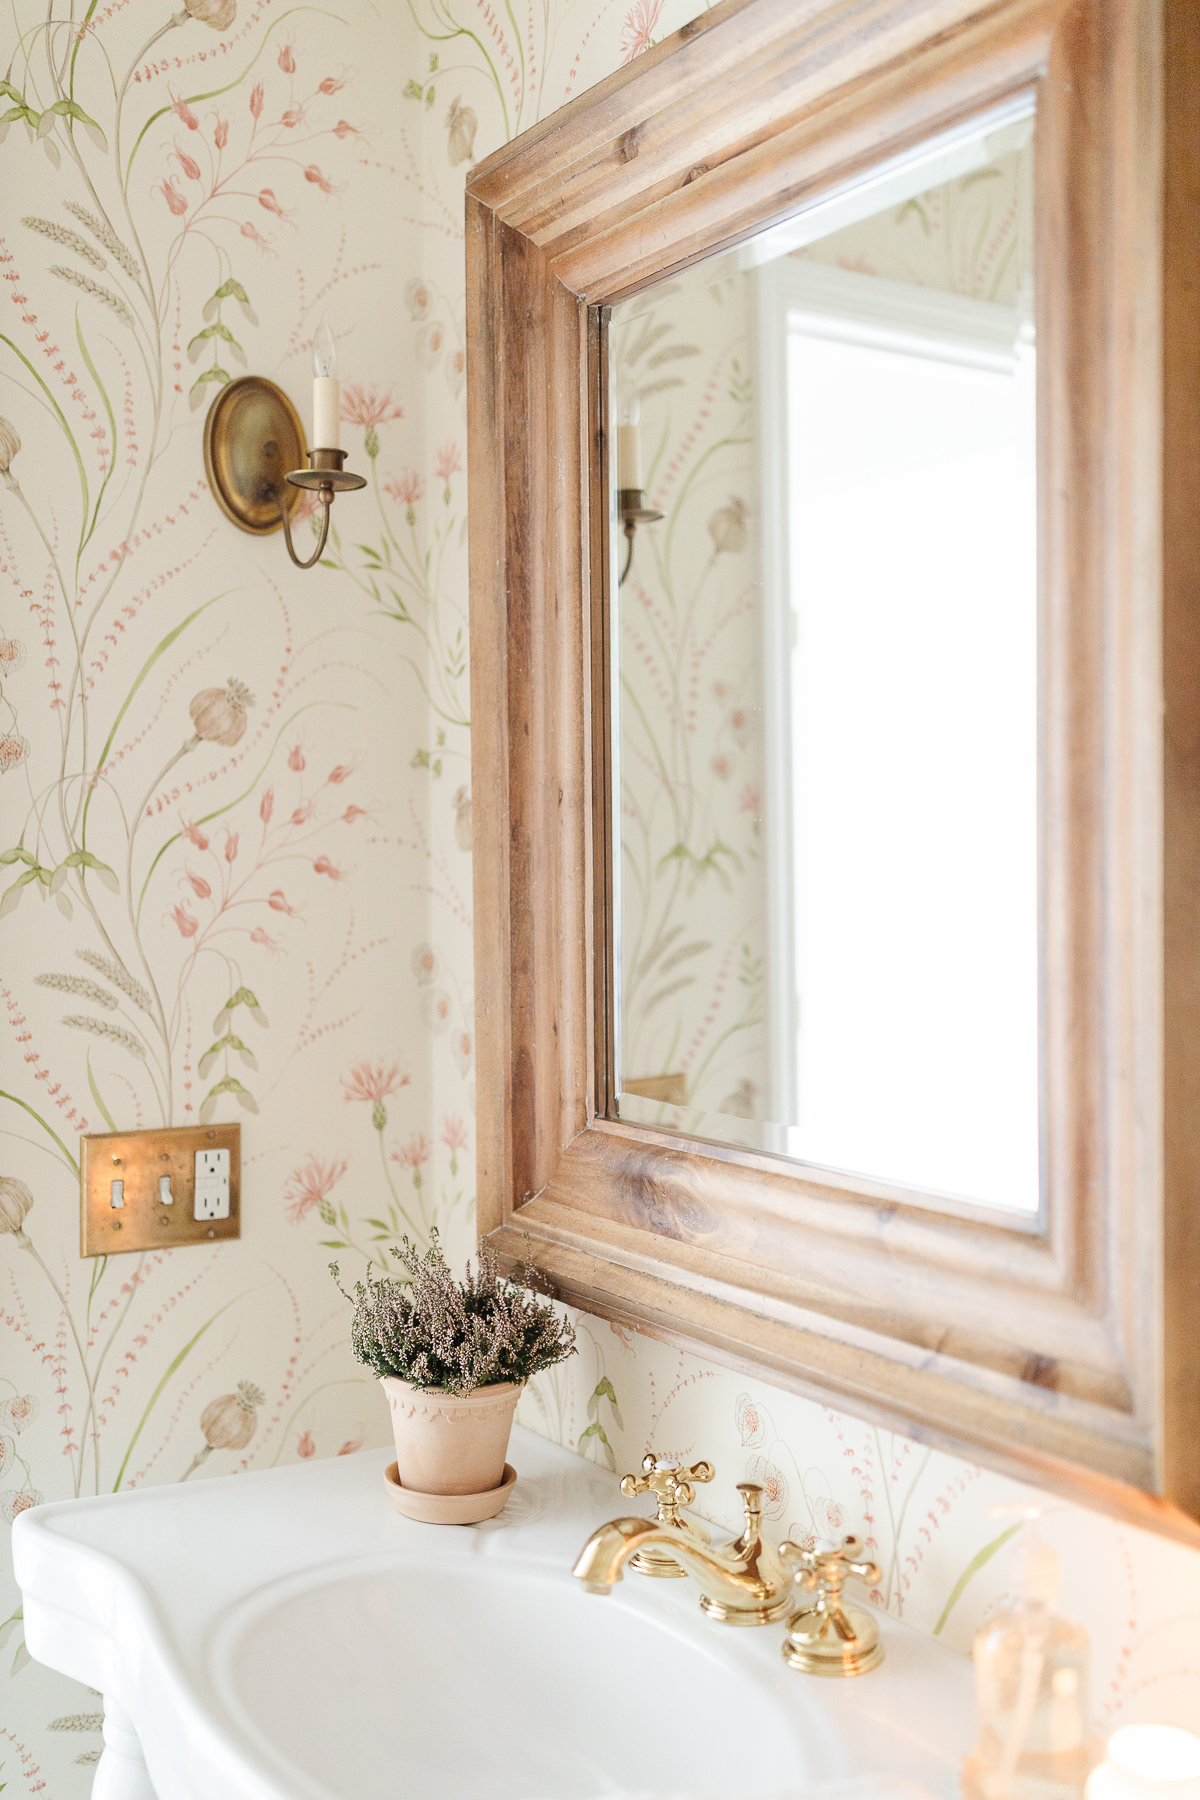 A wallpapered bathroom with a wood mirror and a brass switch plate cover